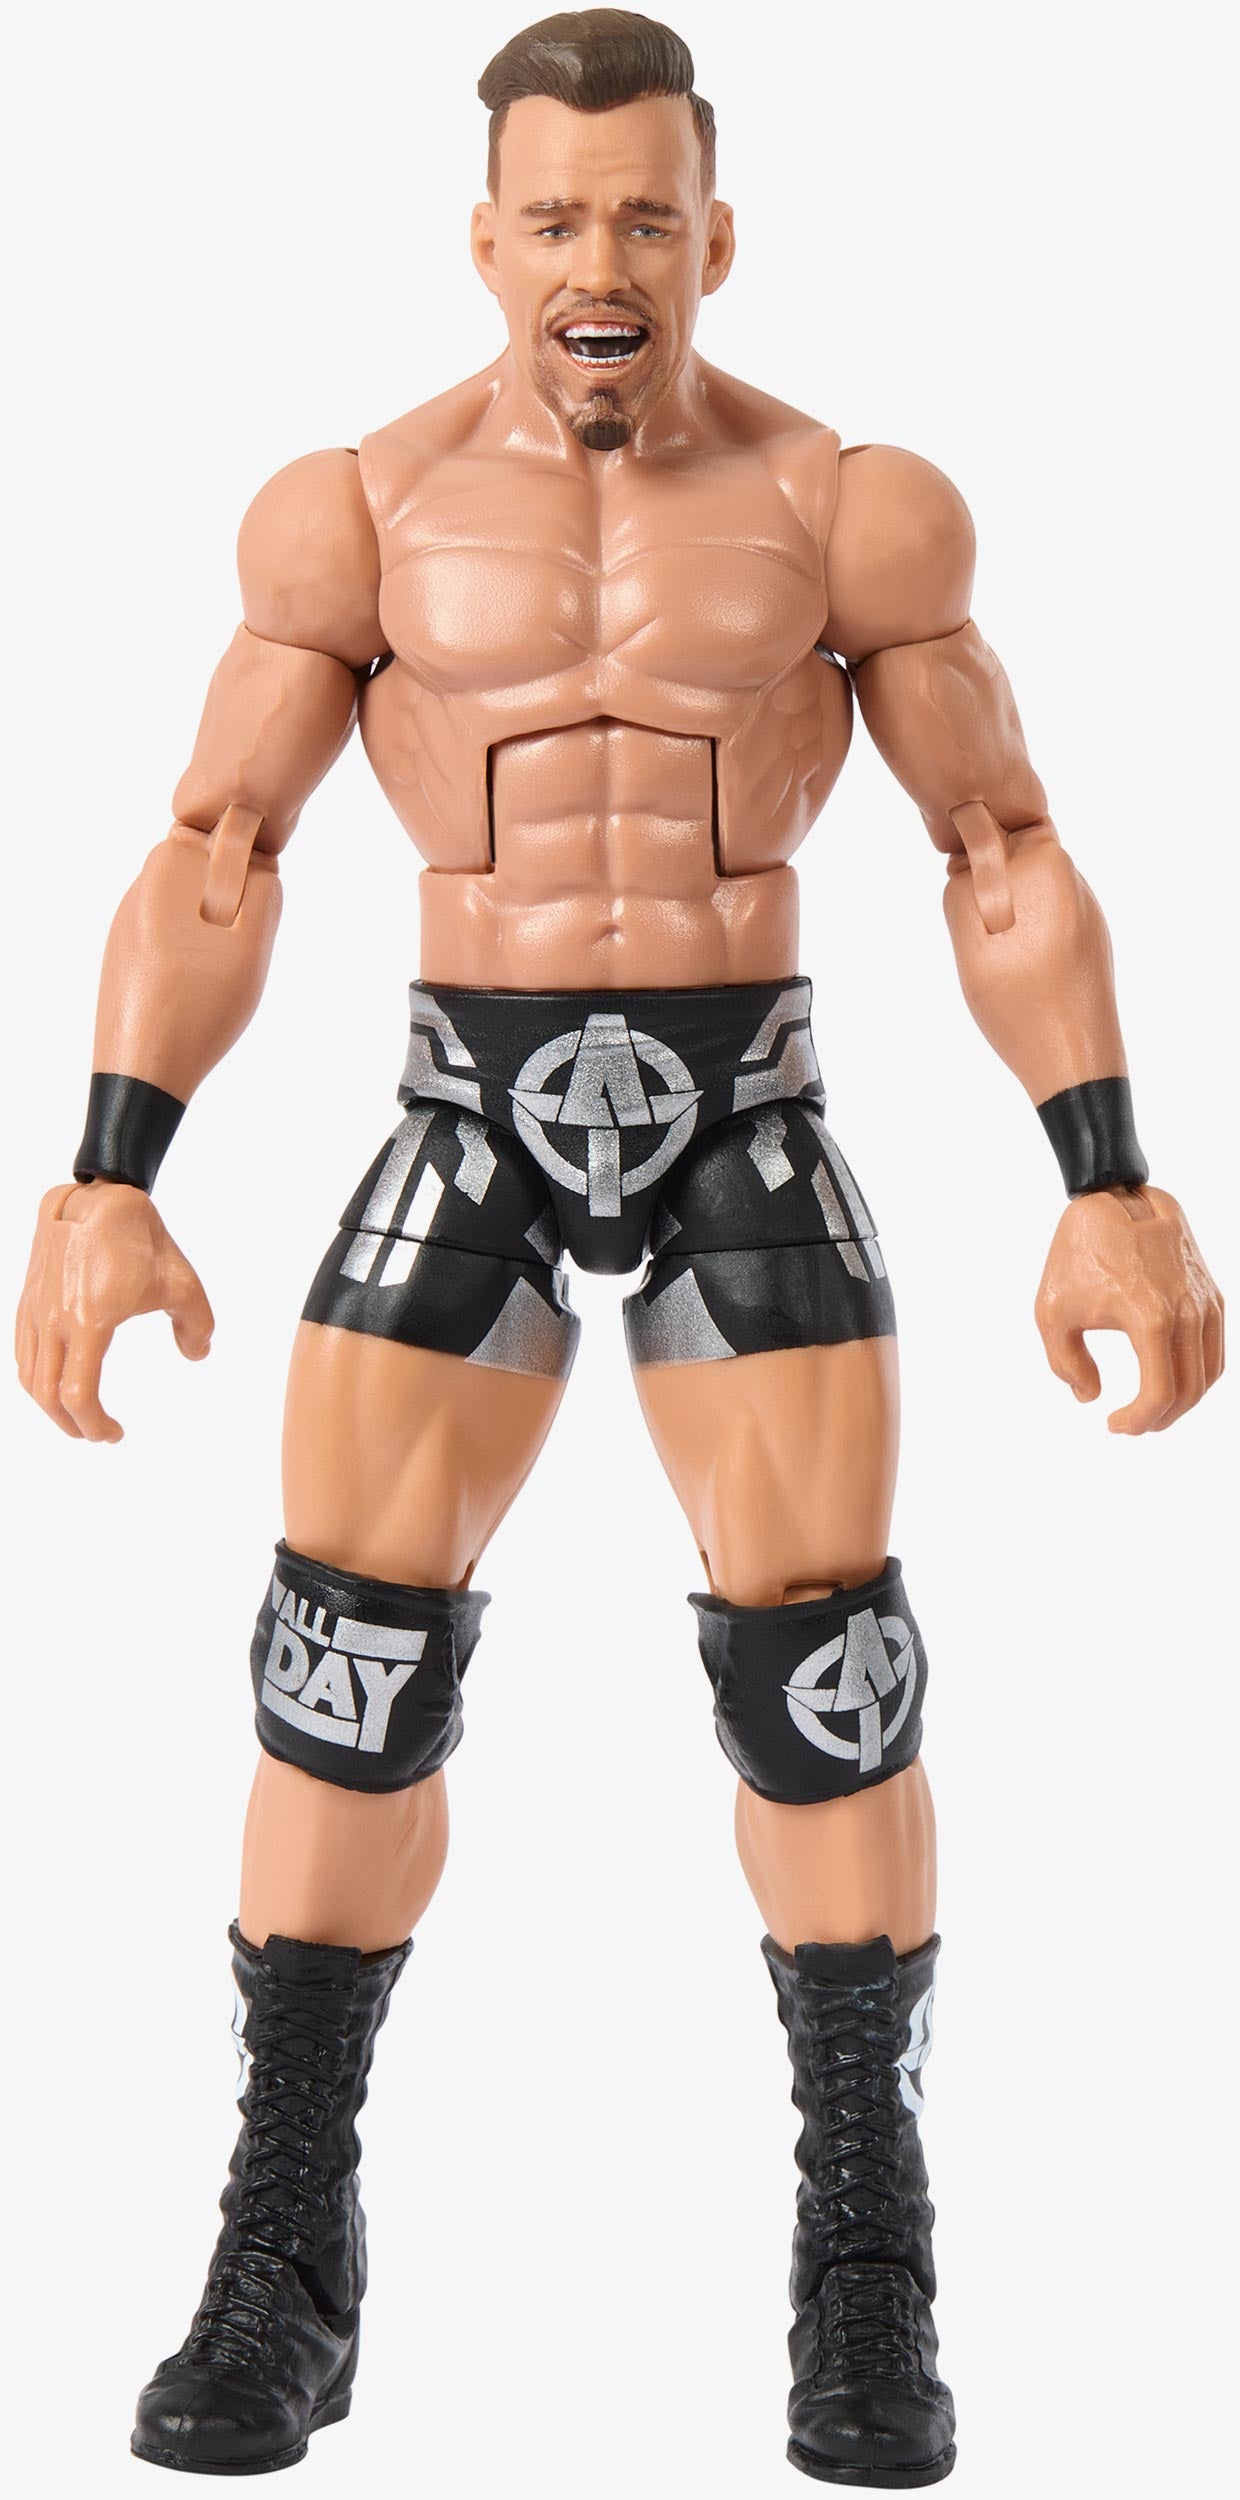 Austin Theory WWE Elite Collection Series #102 (Chase Variant)